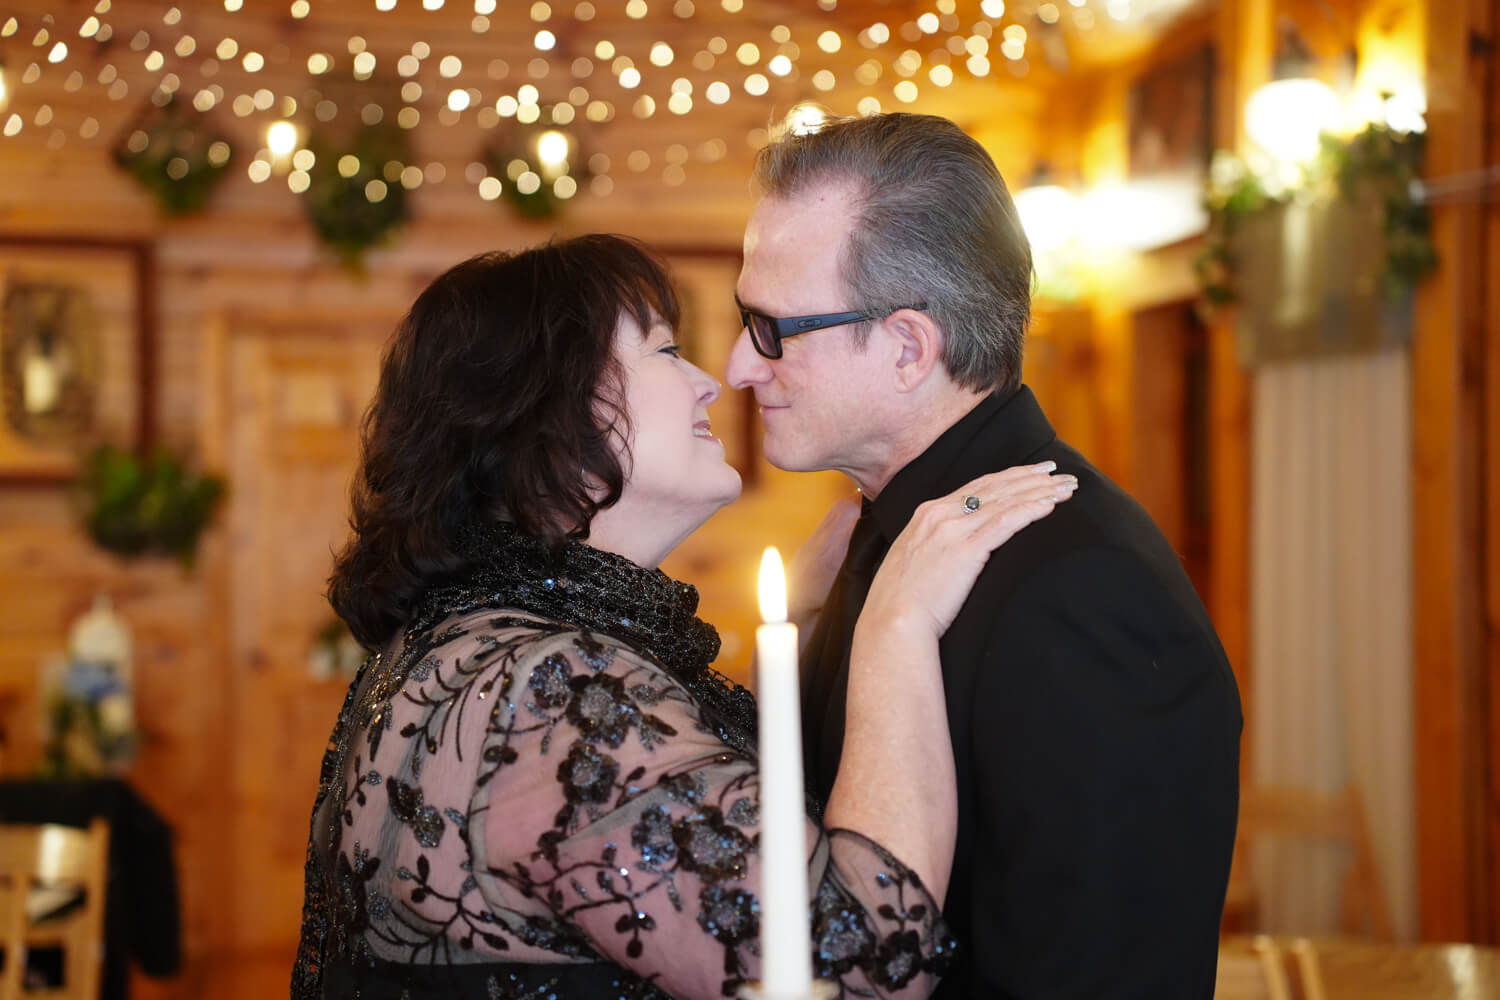 Wedding couple kissing in front of a candle in a wedding chapel with string lights on the ceiling